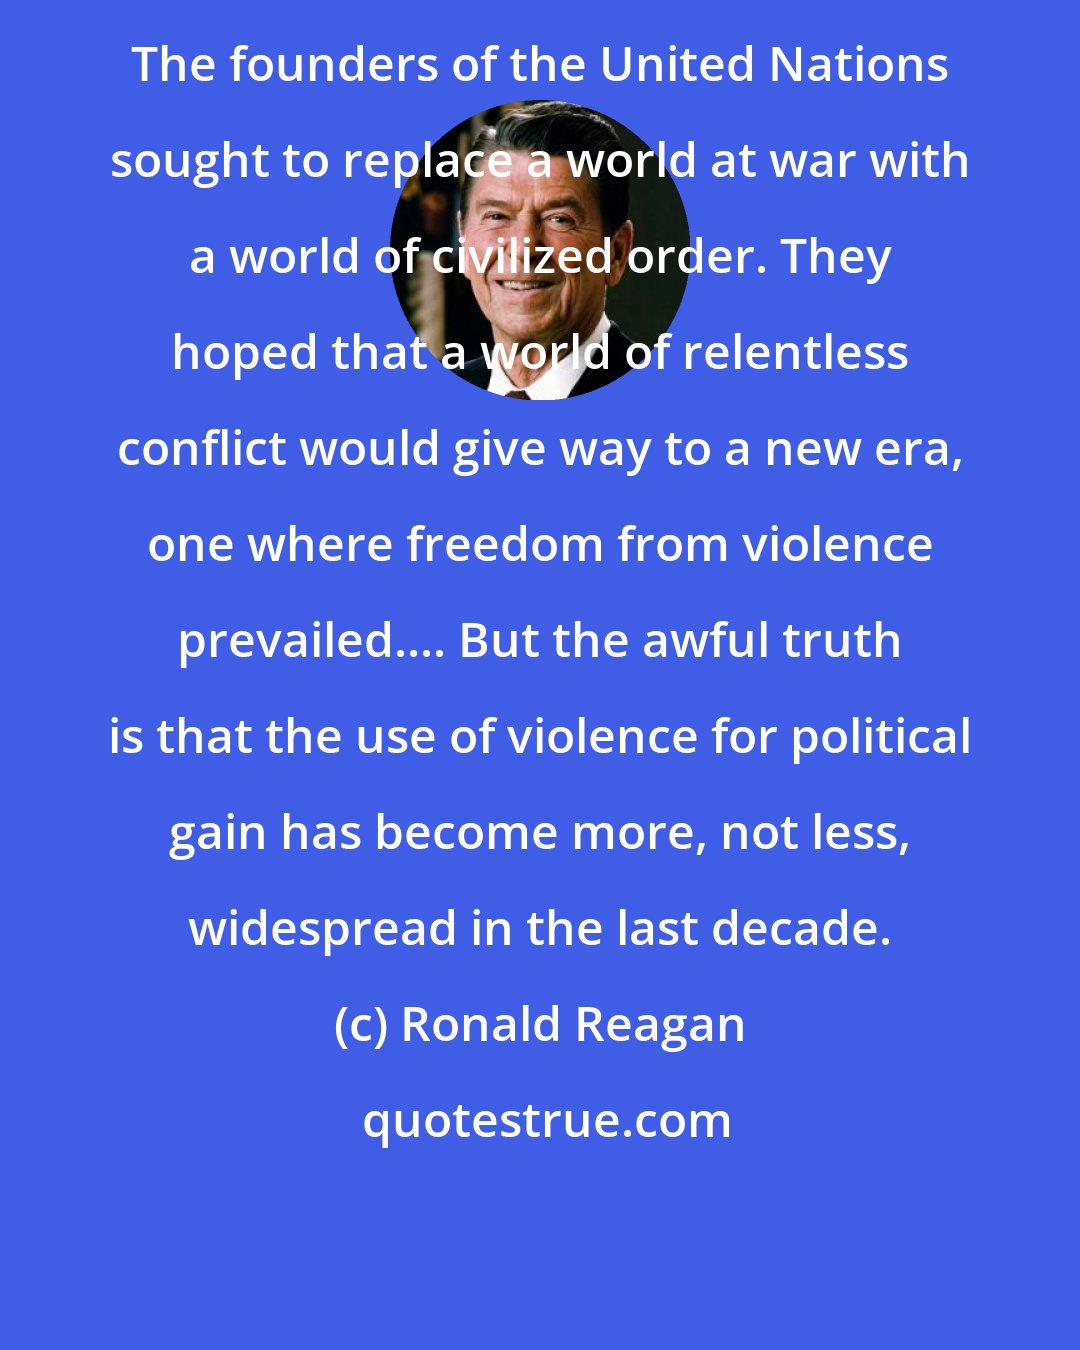 Ronald Reagan: The founders of the United Nations sought to replace a world at war with a world of civilized order. They hoped that a world of relentless conflict would give way to a new era, one where freedom from violence prevailed.... But the awful truth is that the use of violence for political gain has become more, not less, widespread in the last decade.